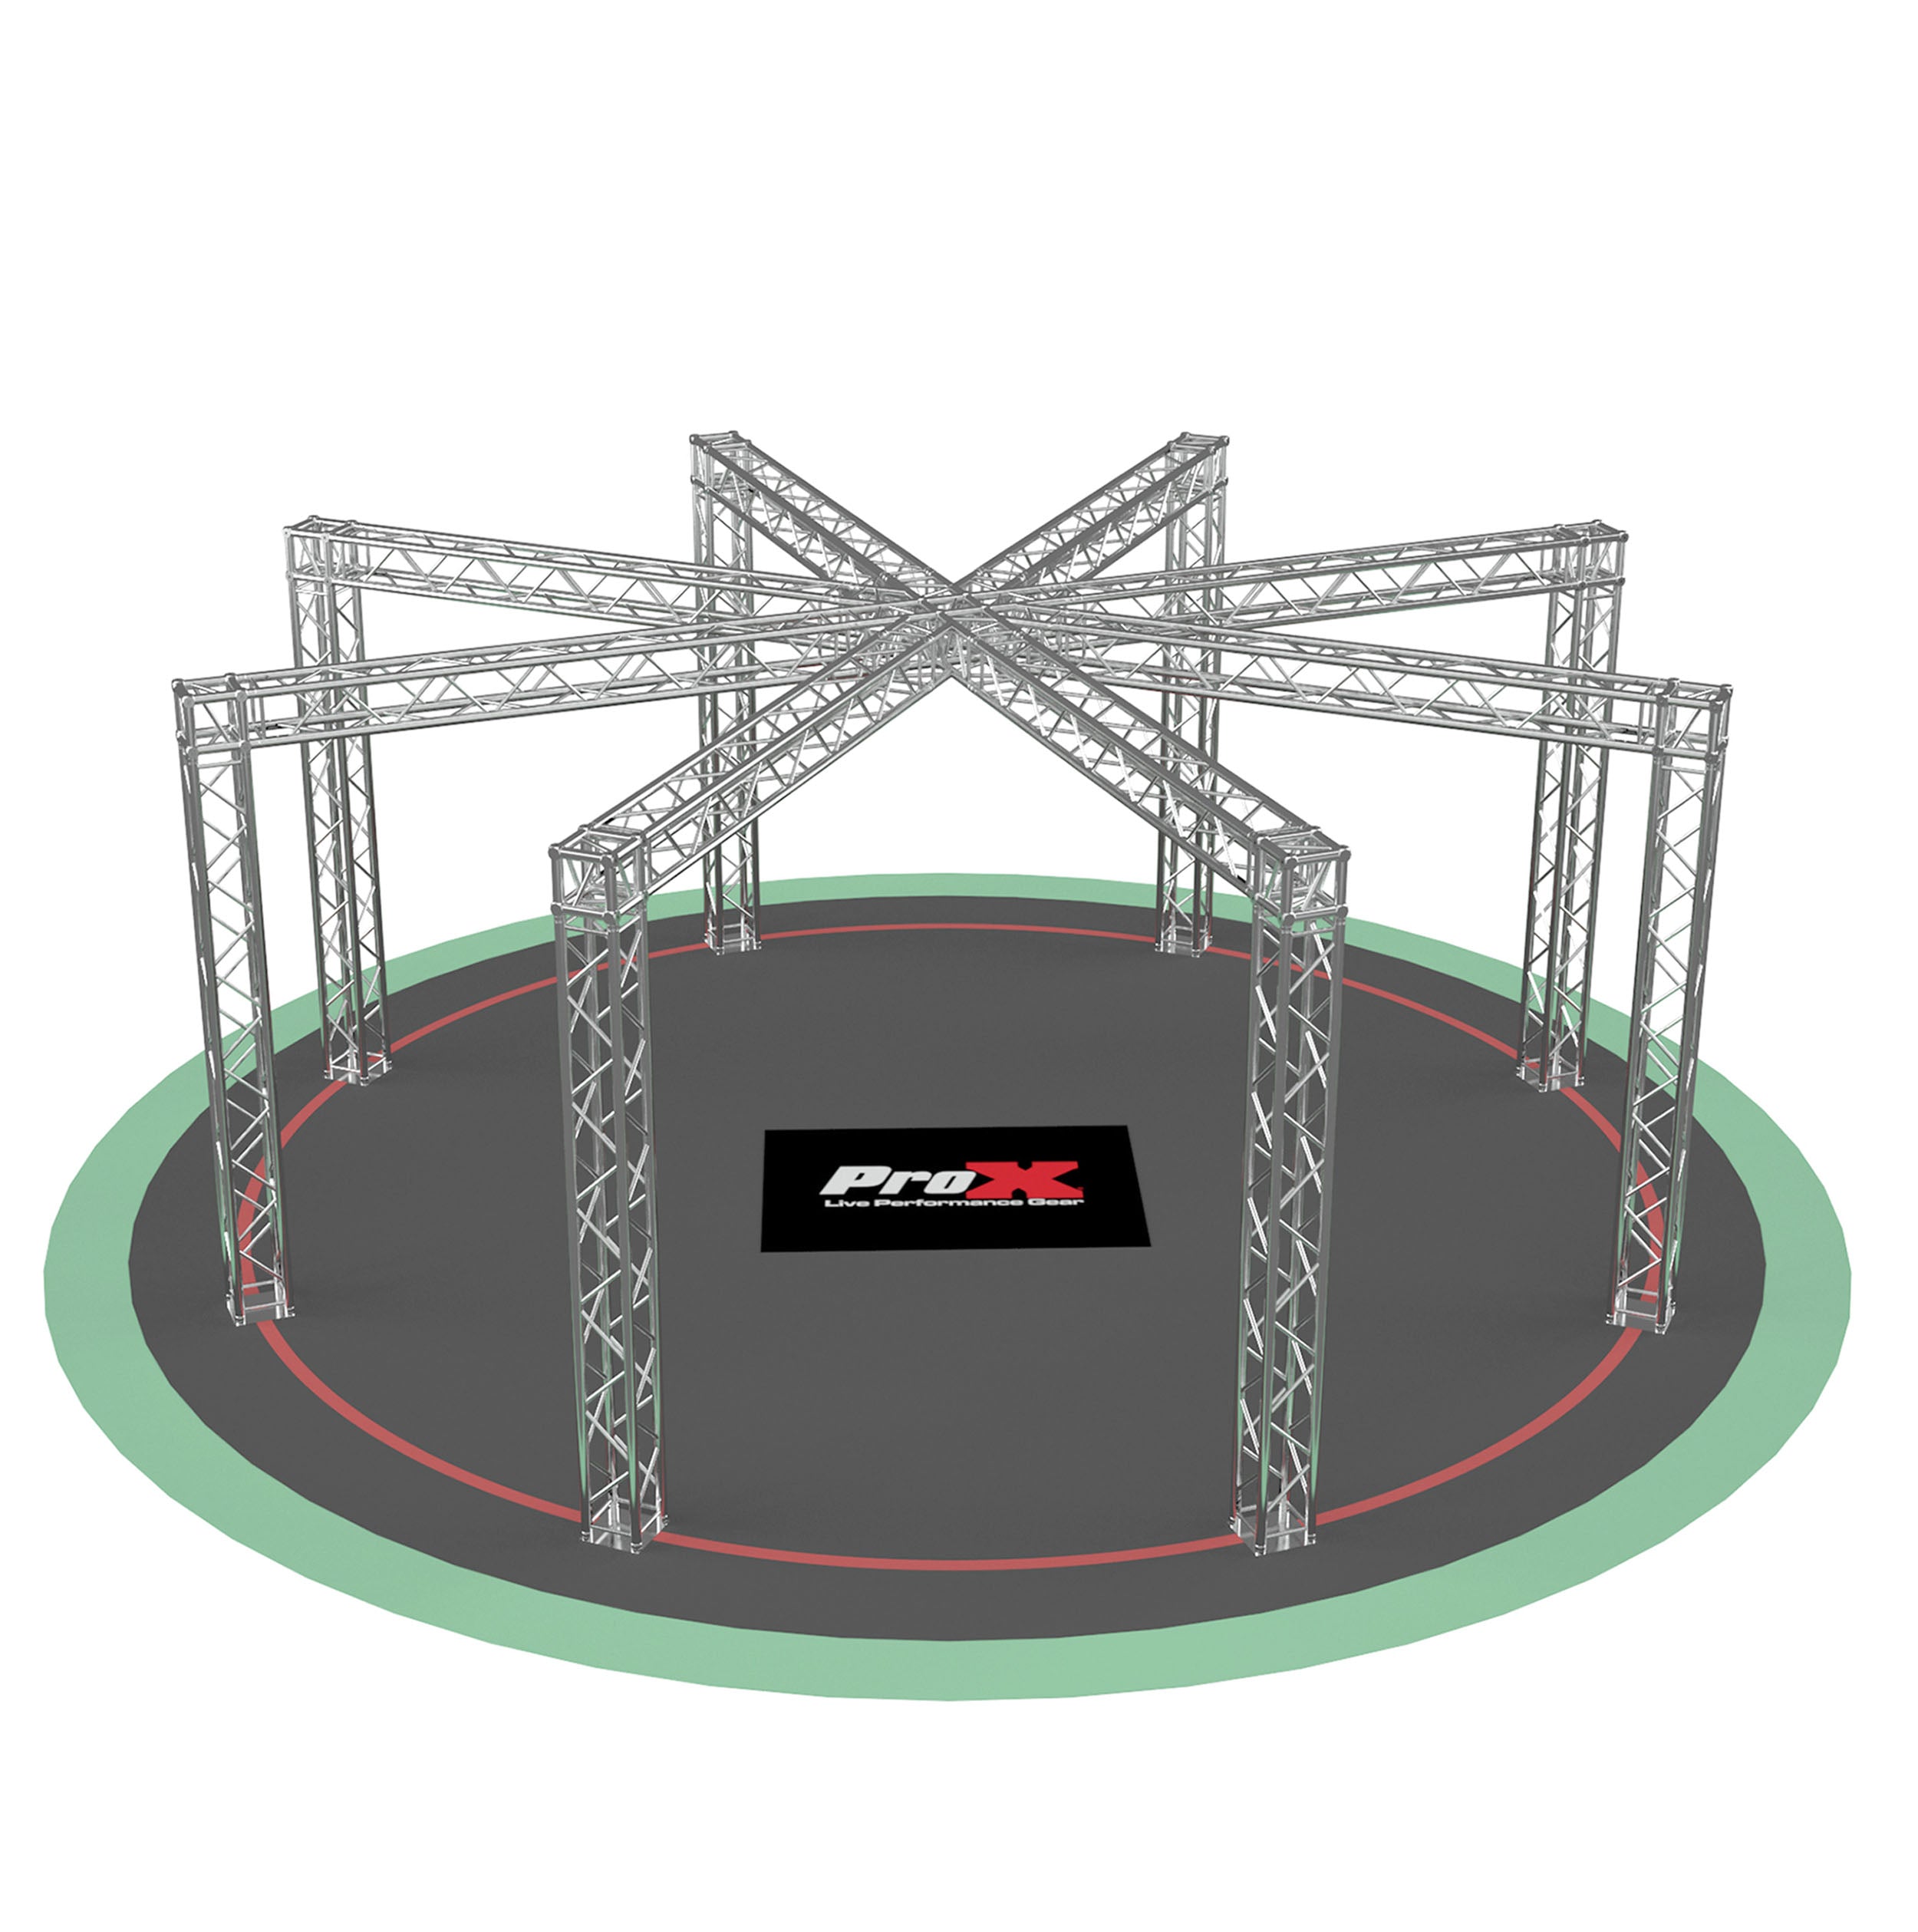 Pro X F34 Spider Trade Show Display Booth Truss System – 9 x 22 Ft. XTP-10W9ES22